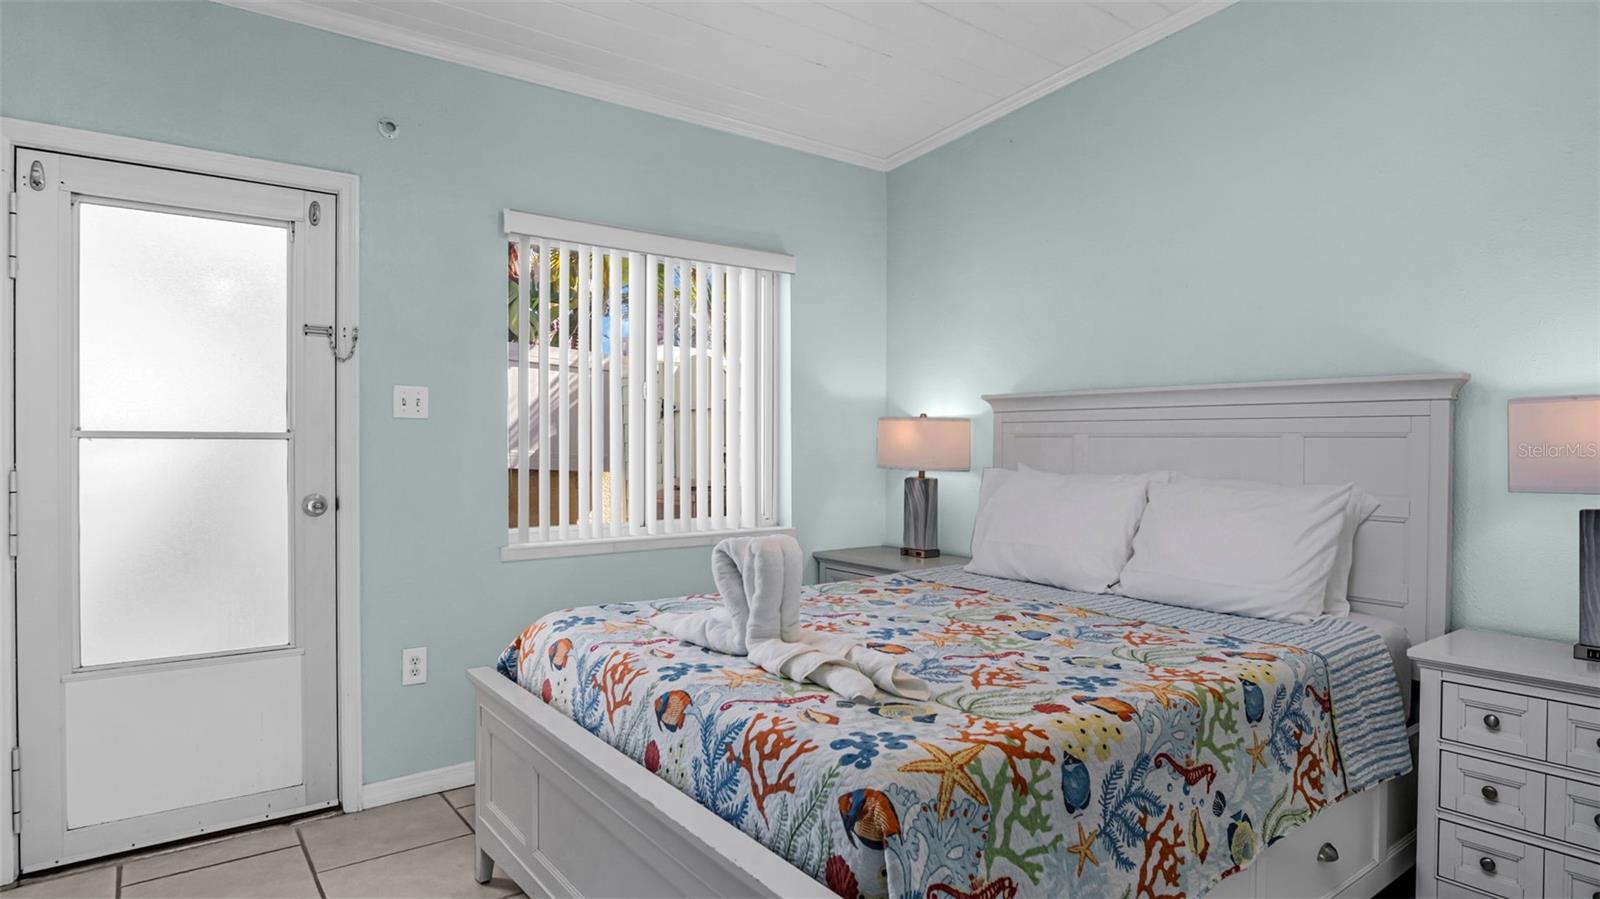 Large bedroom with exit to the backyard patio and community laundry room.